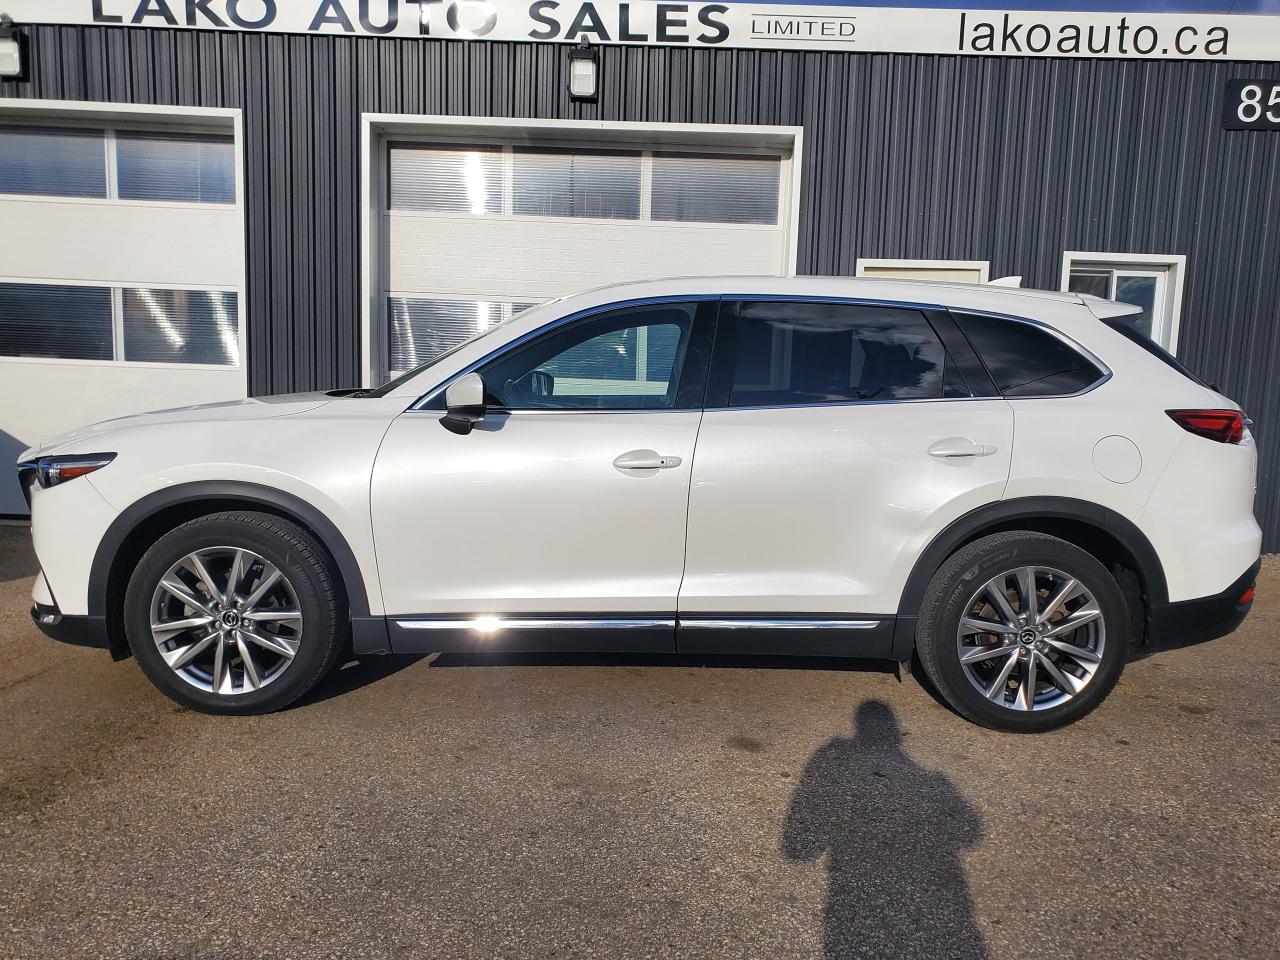 2019 Mazda CX-9 GT AWD - 7 Passenger FULLY LOADED * CERTIFIED - Photo #5